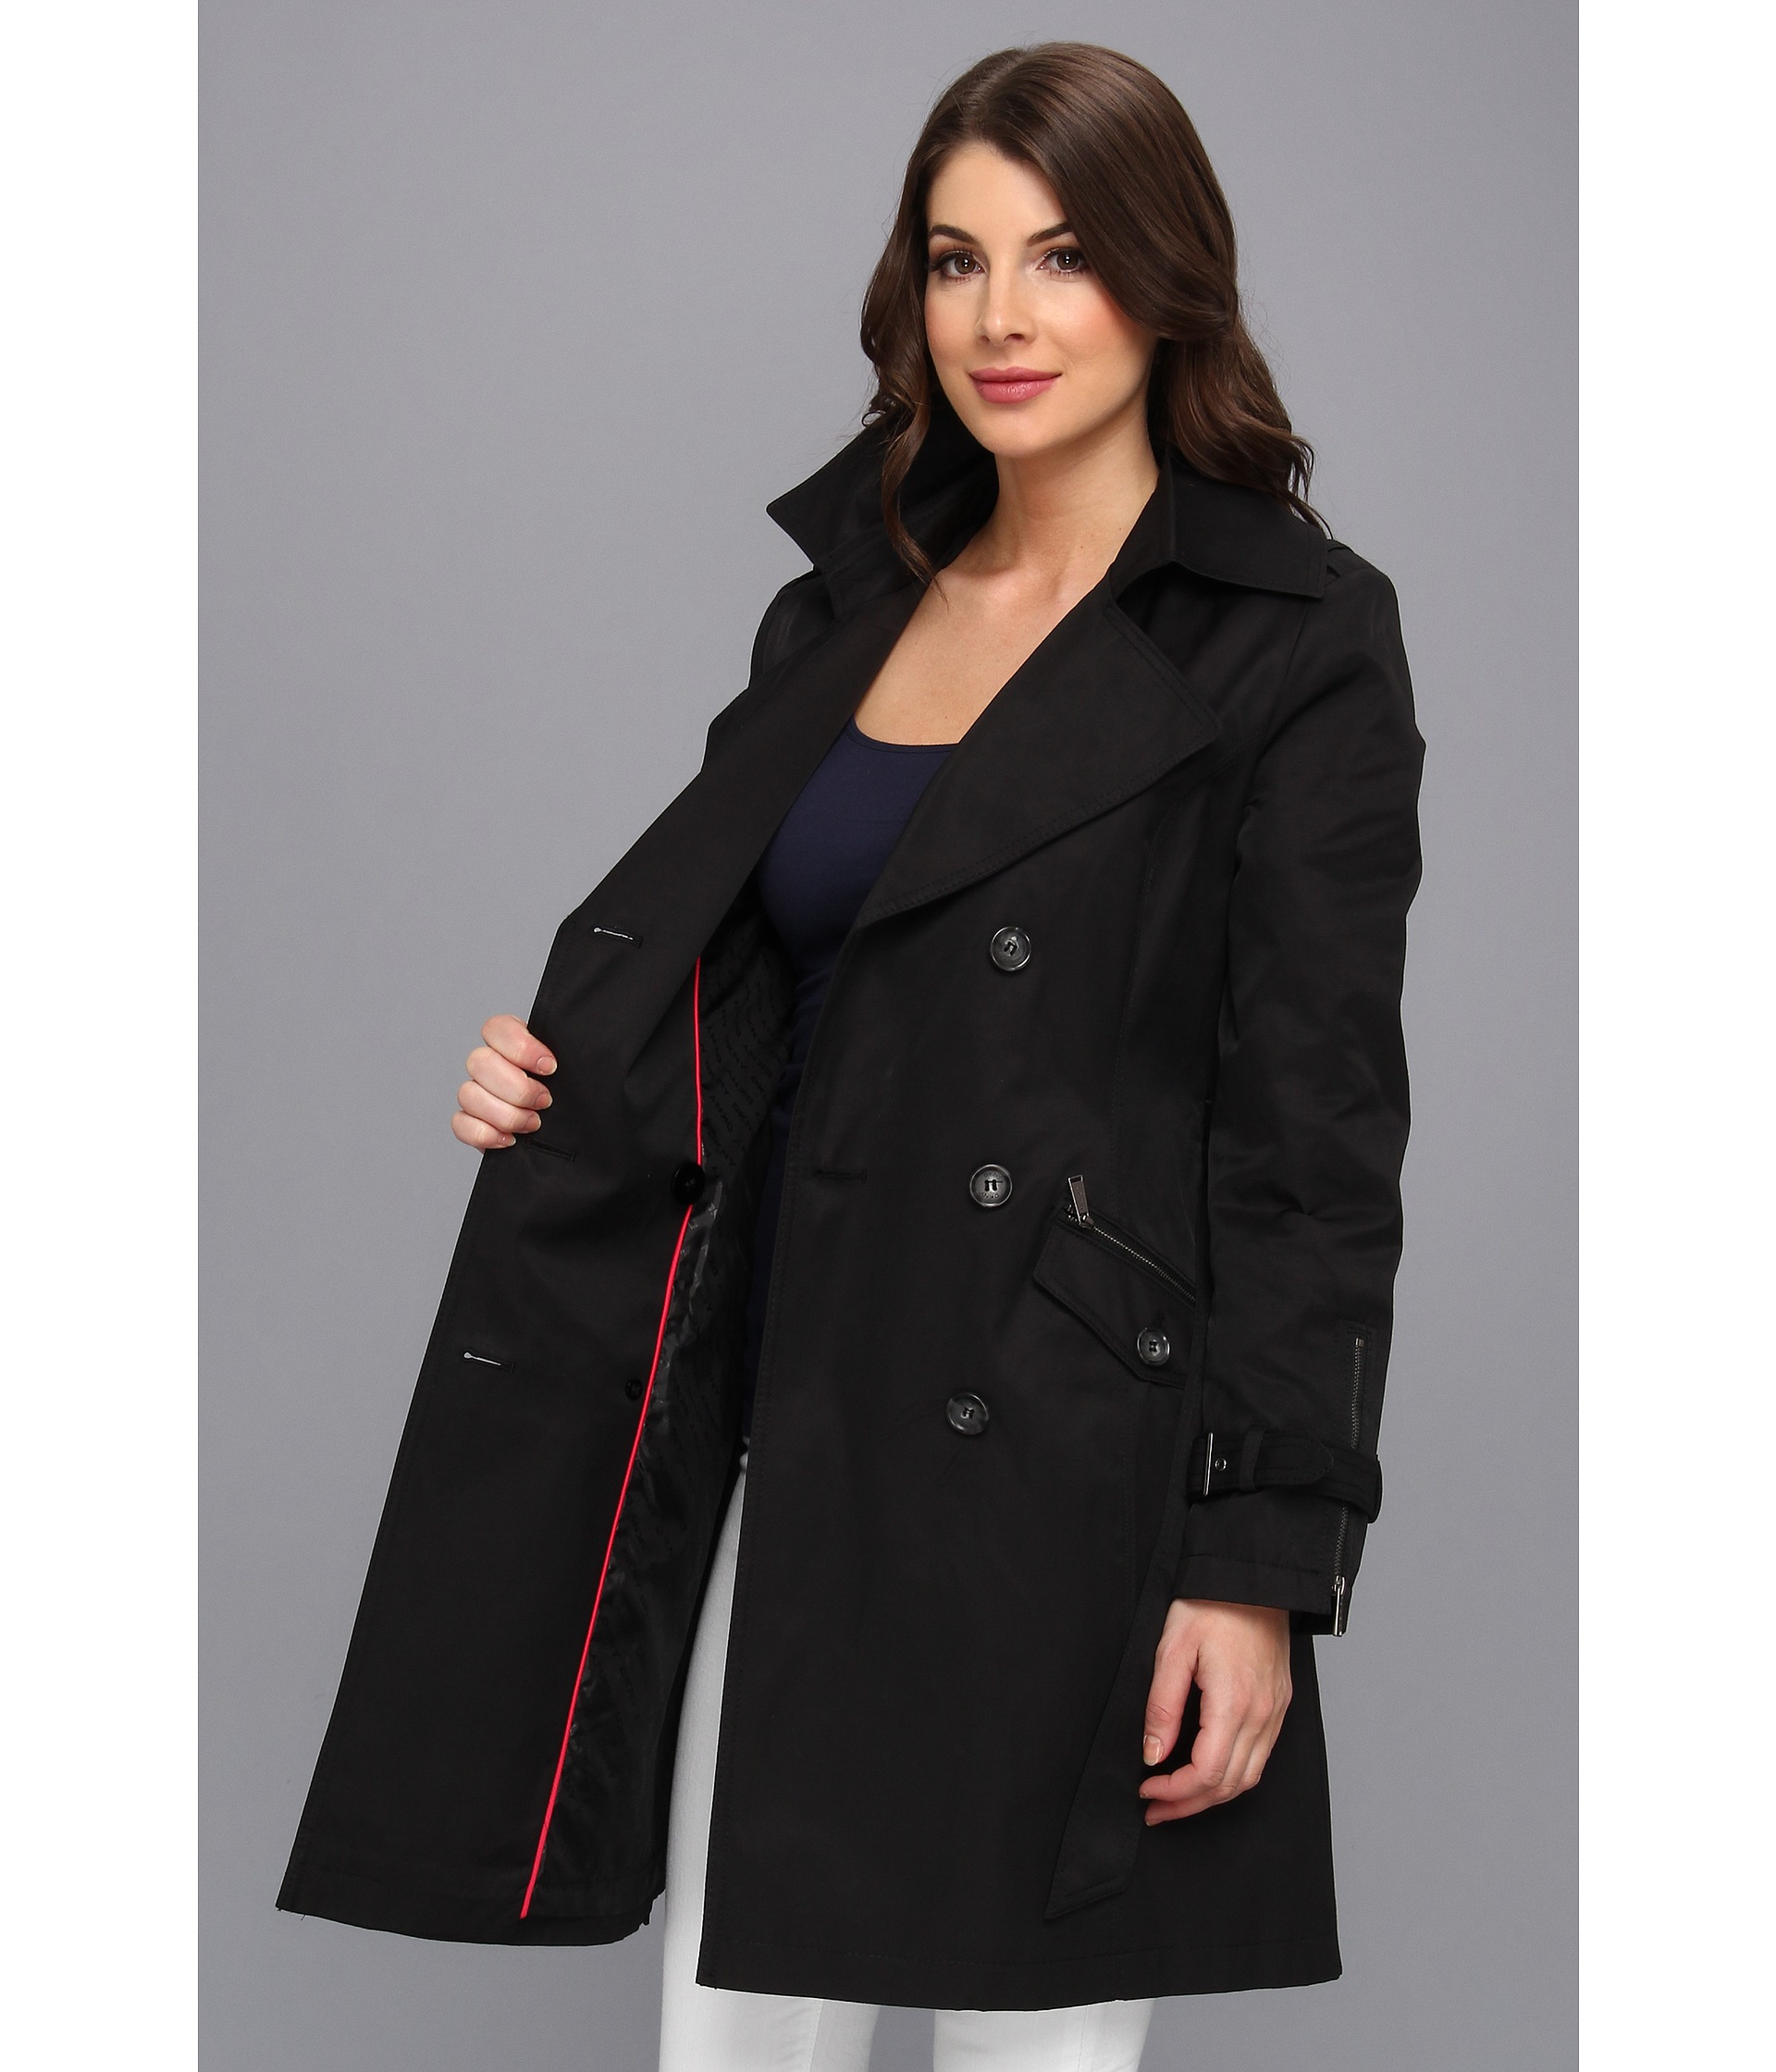 Dkny Double Breasted Long Wool Blend Military Coat (petite) in Black | Lyst